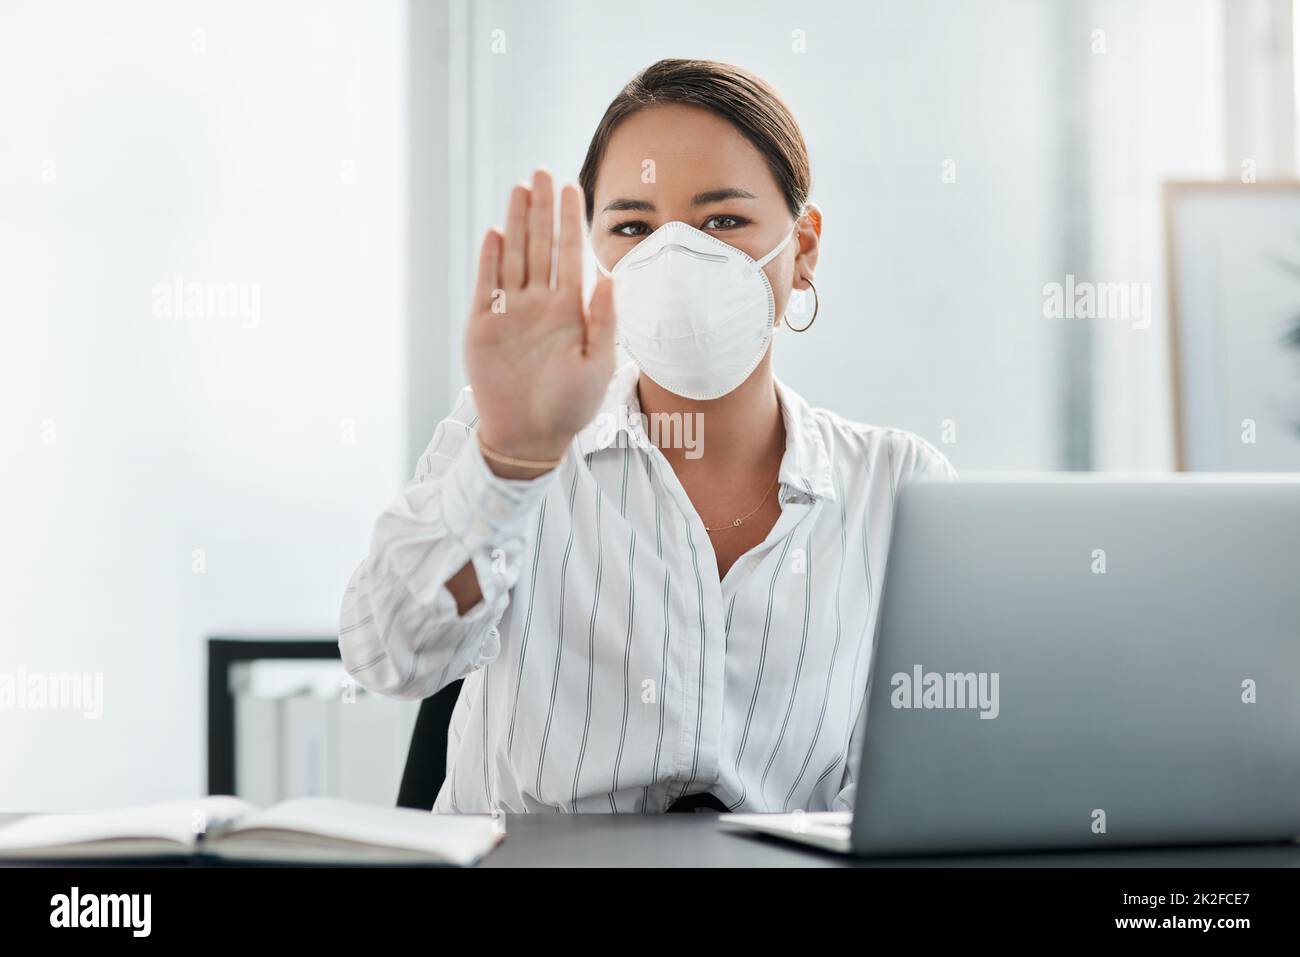 Keep your distance for your safety and mind. Shot of a masked young businesswoman gesturing to stay away while working at her desk in a modern office. Stock Photo